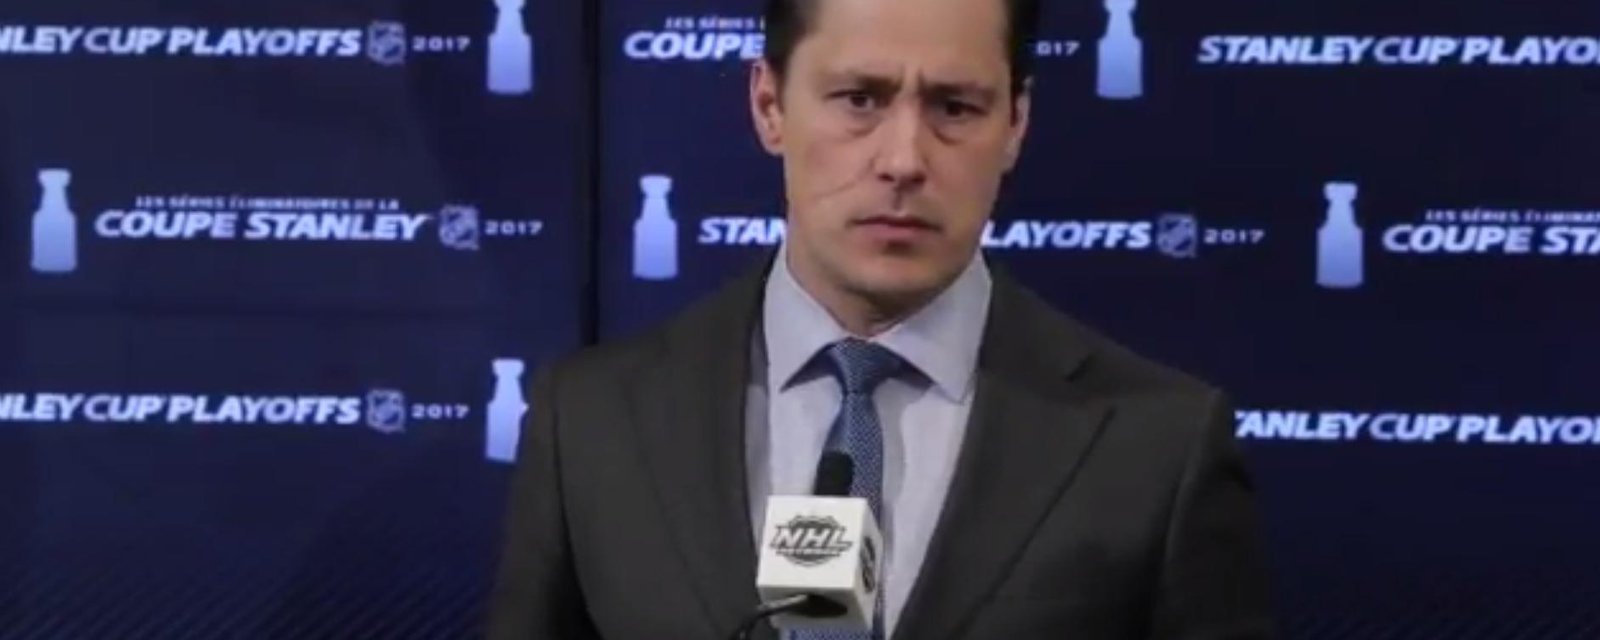 Guy Boucher's past comes back to the surface... 